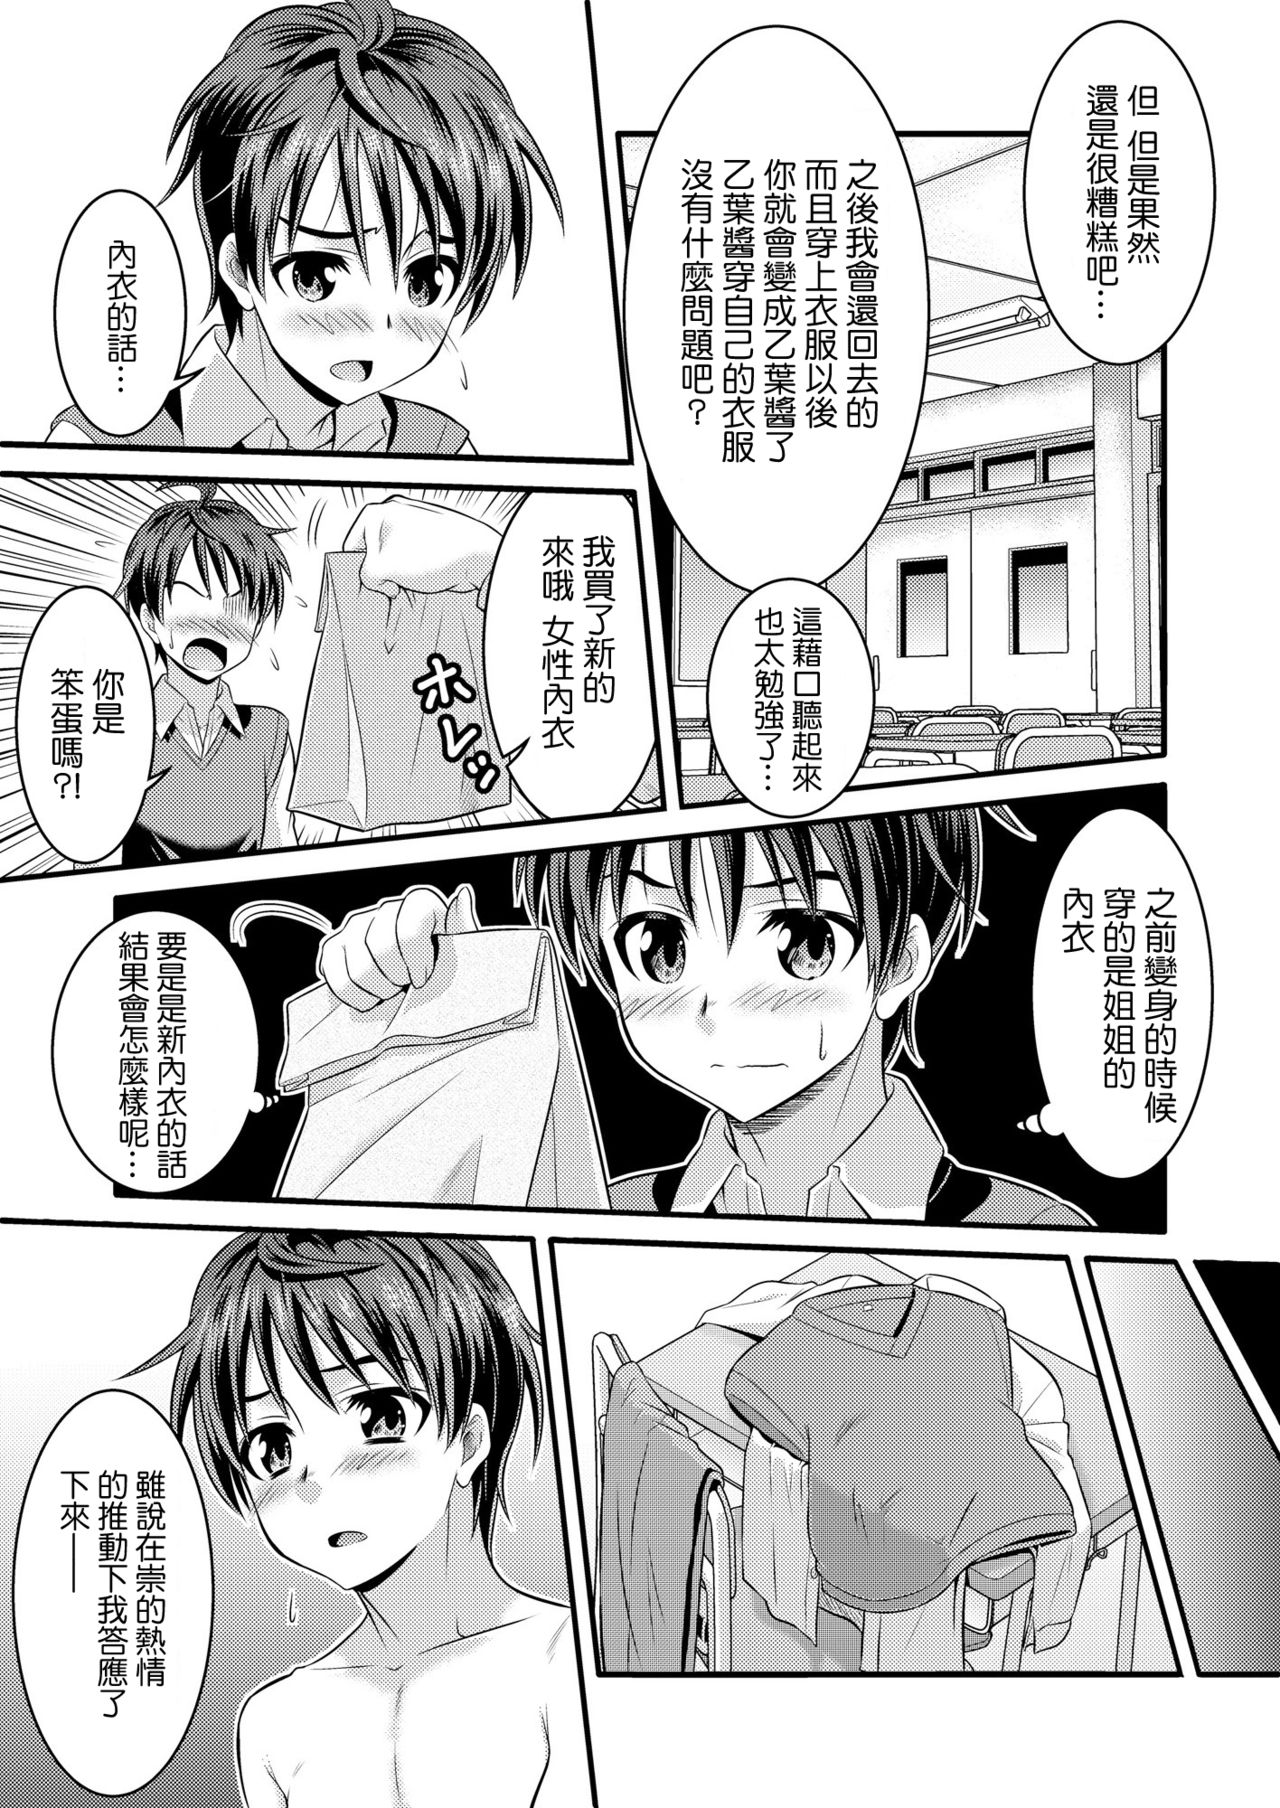 Metamorph ★ Coordination - I Become Whatever Girl I Crossdress As~ [Sister Arc, Classmate Arc] [Chinese] [瑞树汉化组] page 22 full